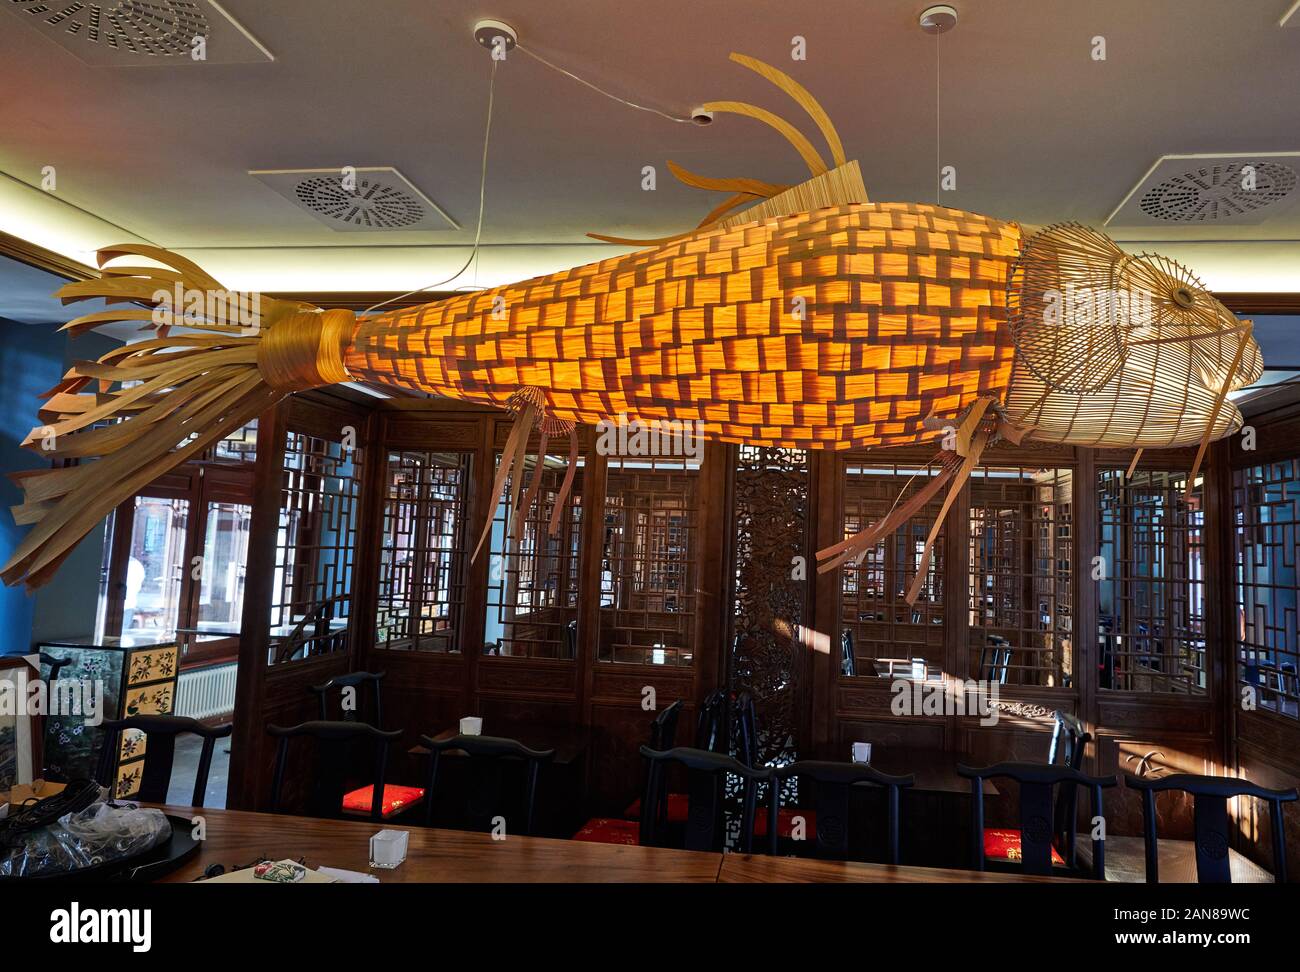 Hamburg Germany 16th Jan 2020 A Wooden Fish Hangs From The